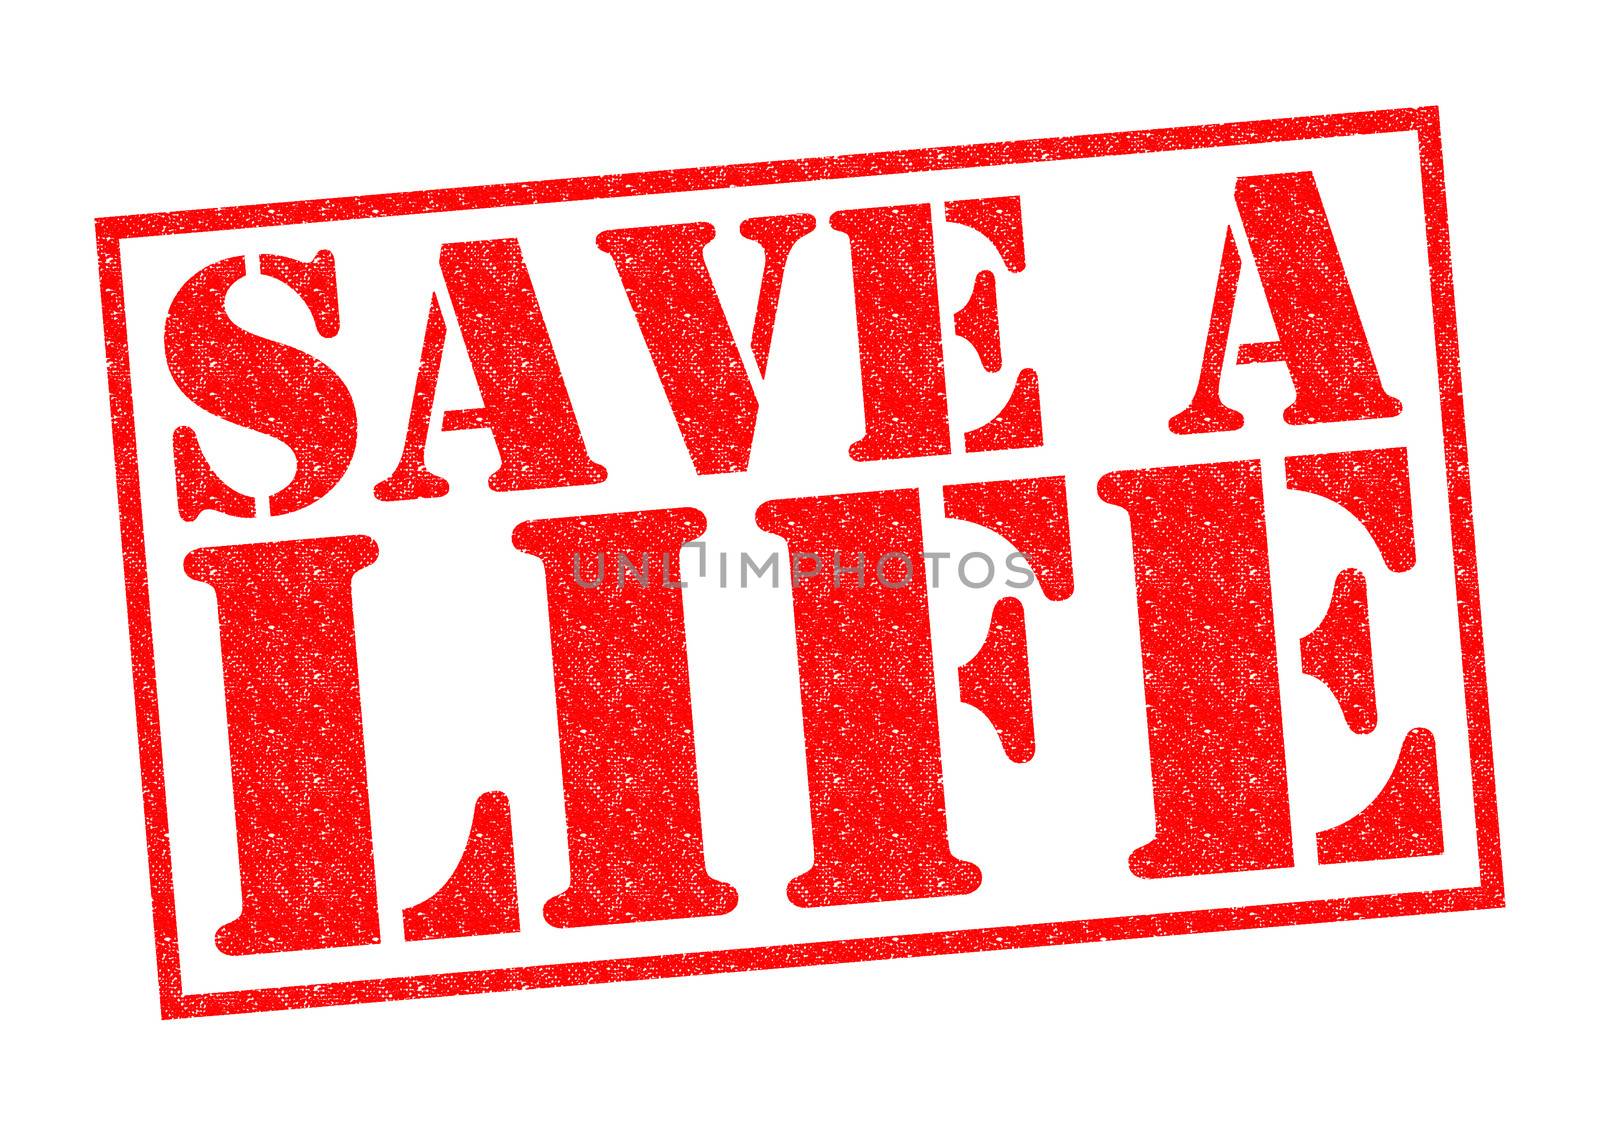 SAVE A LIFE red Rubber Stamp over a white background.